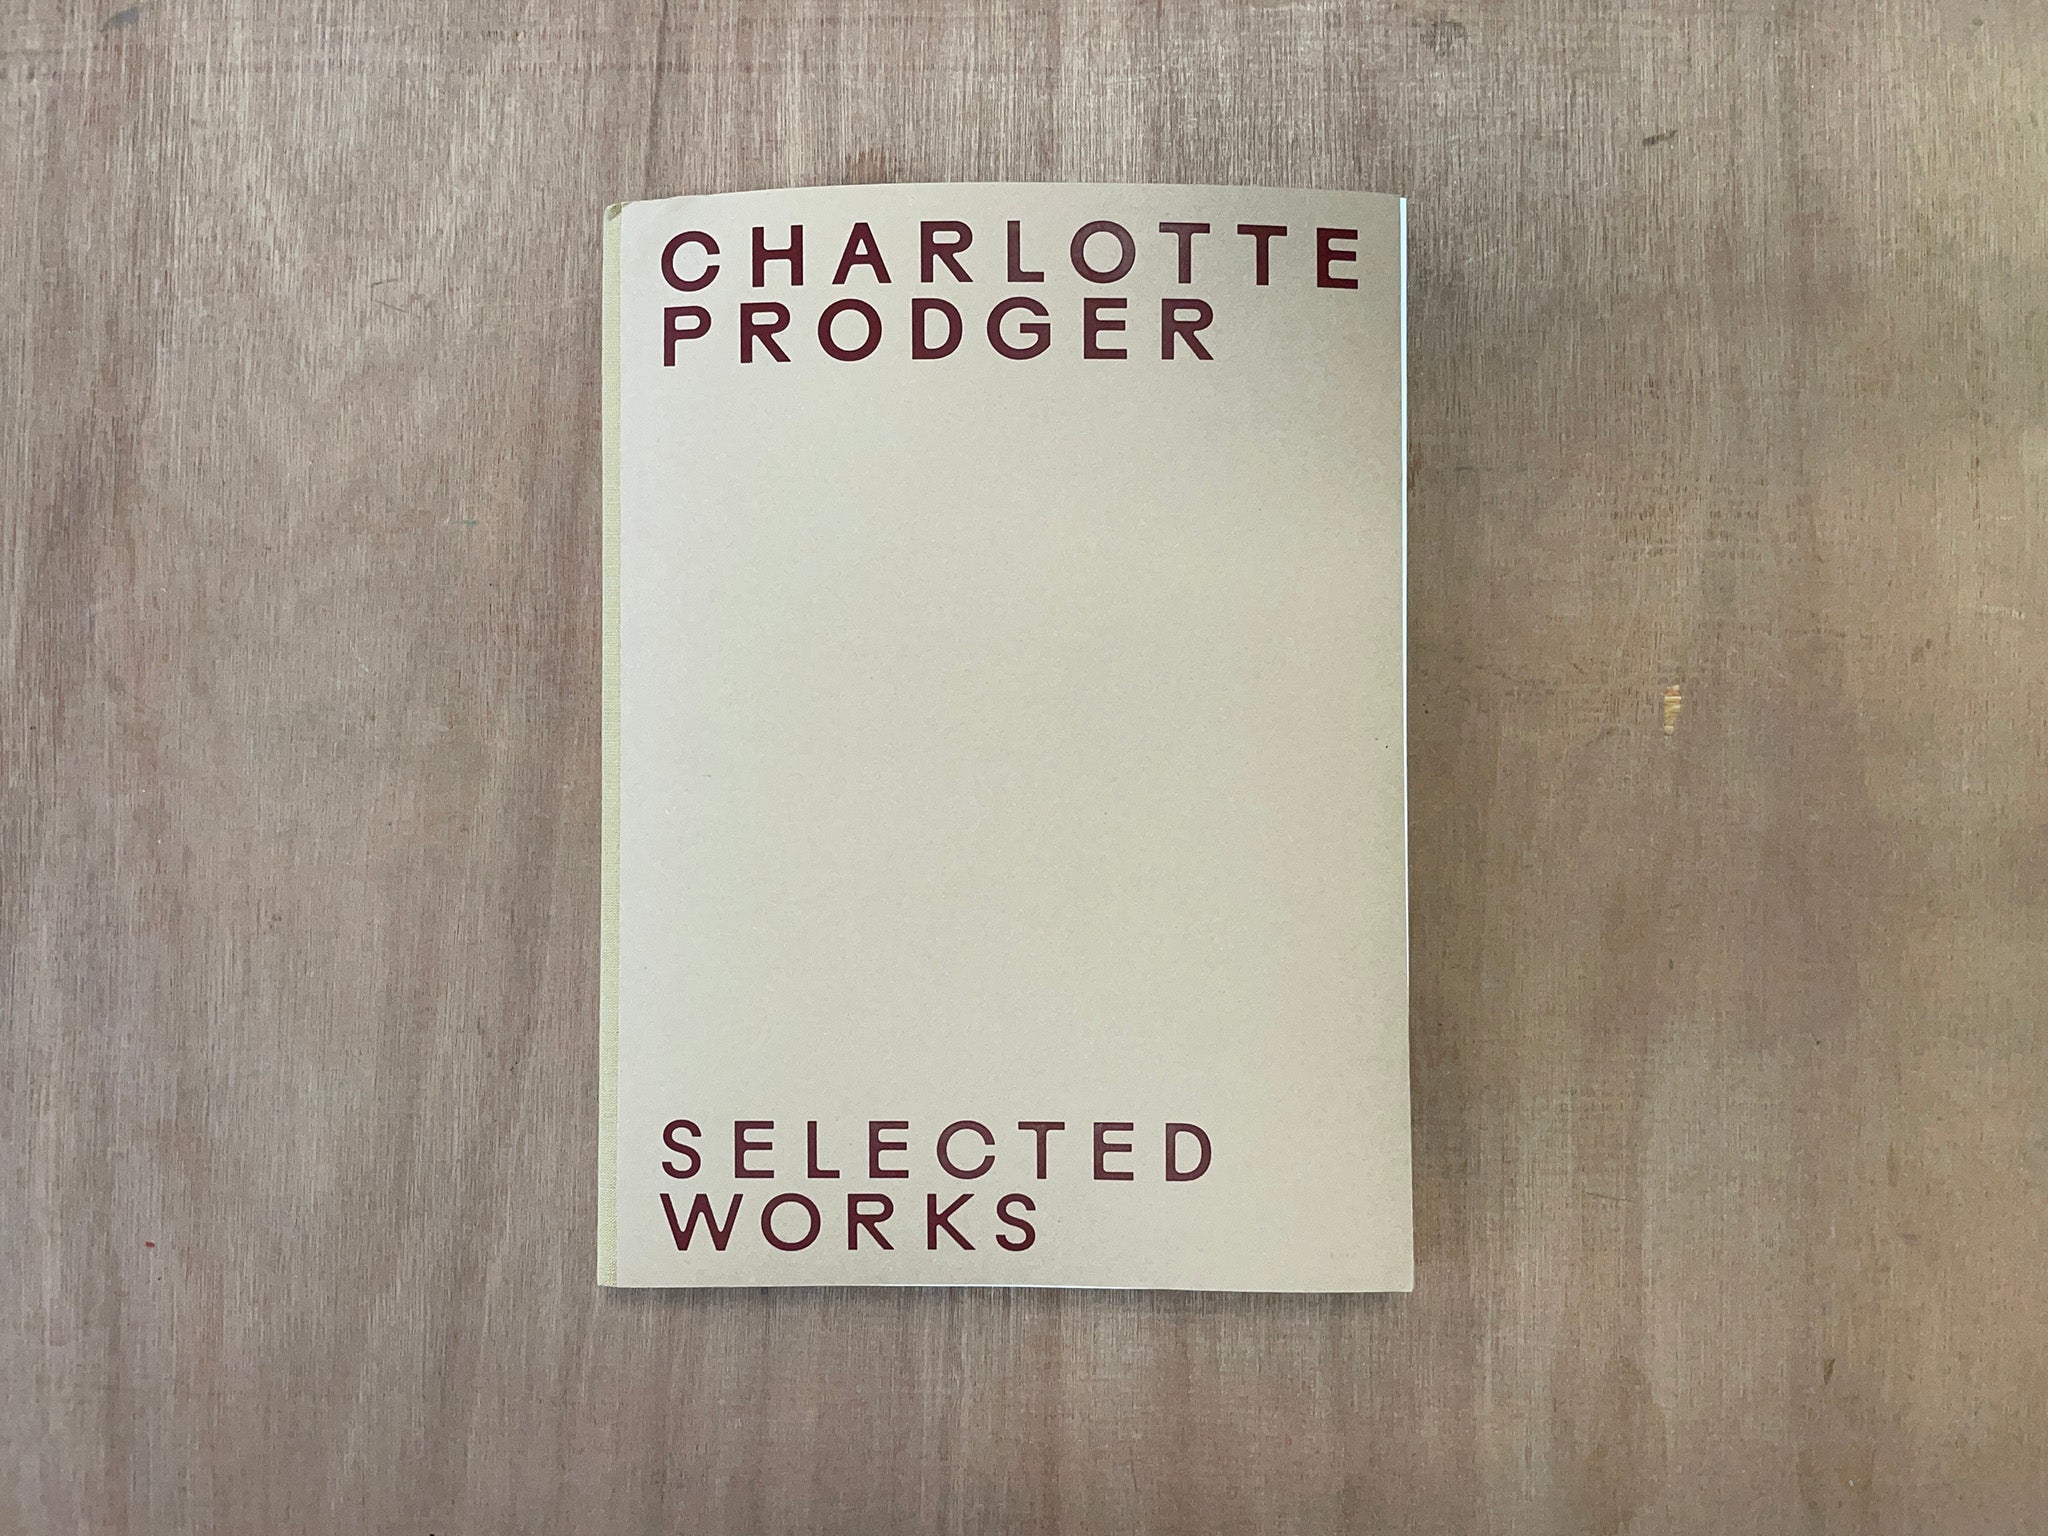 SELECTED WORKS by Charlotte Prodger